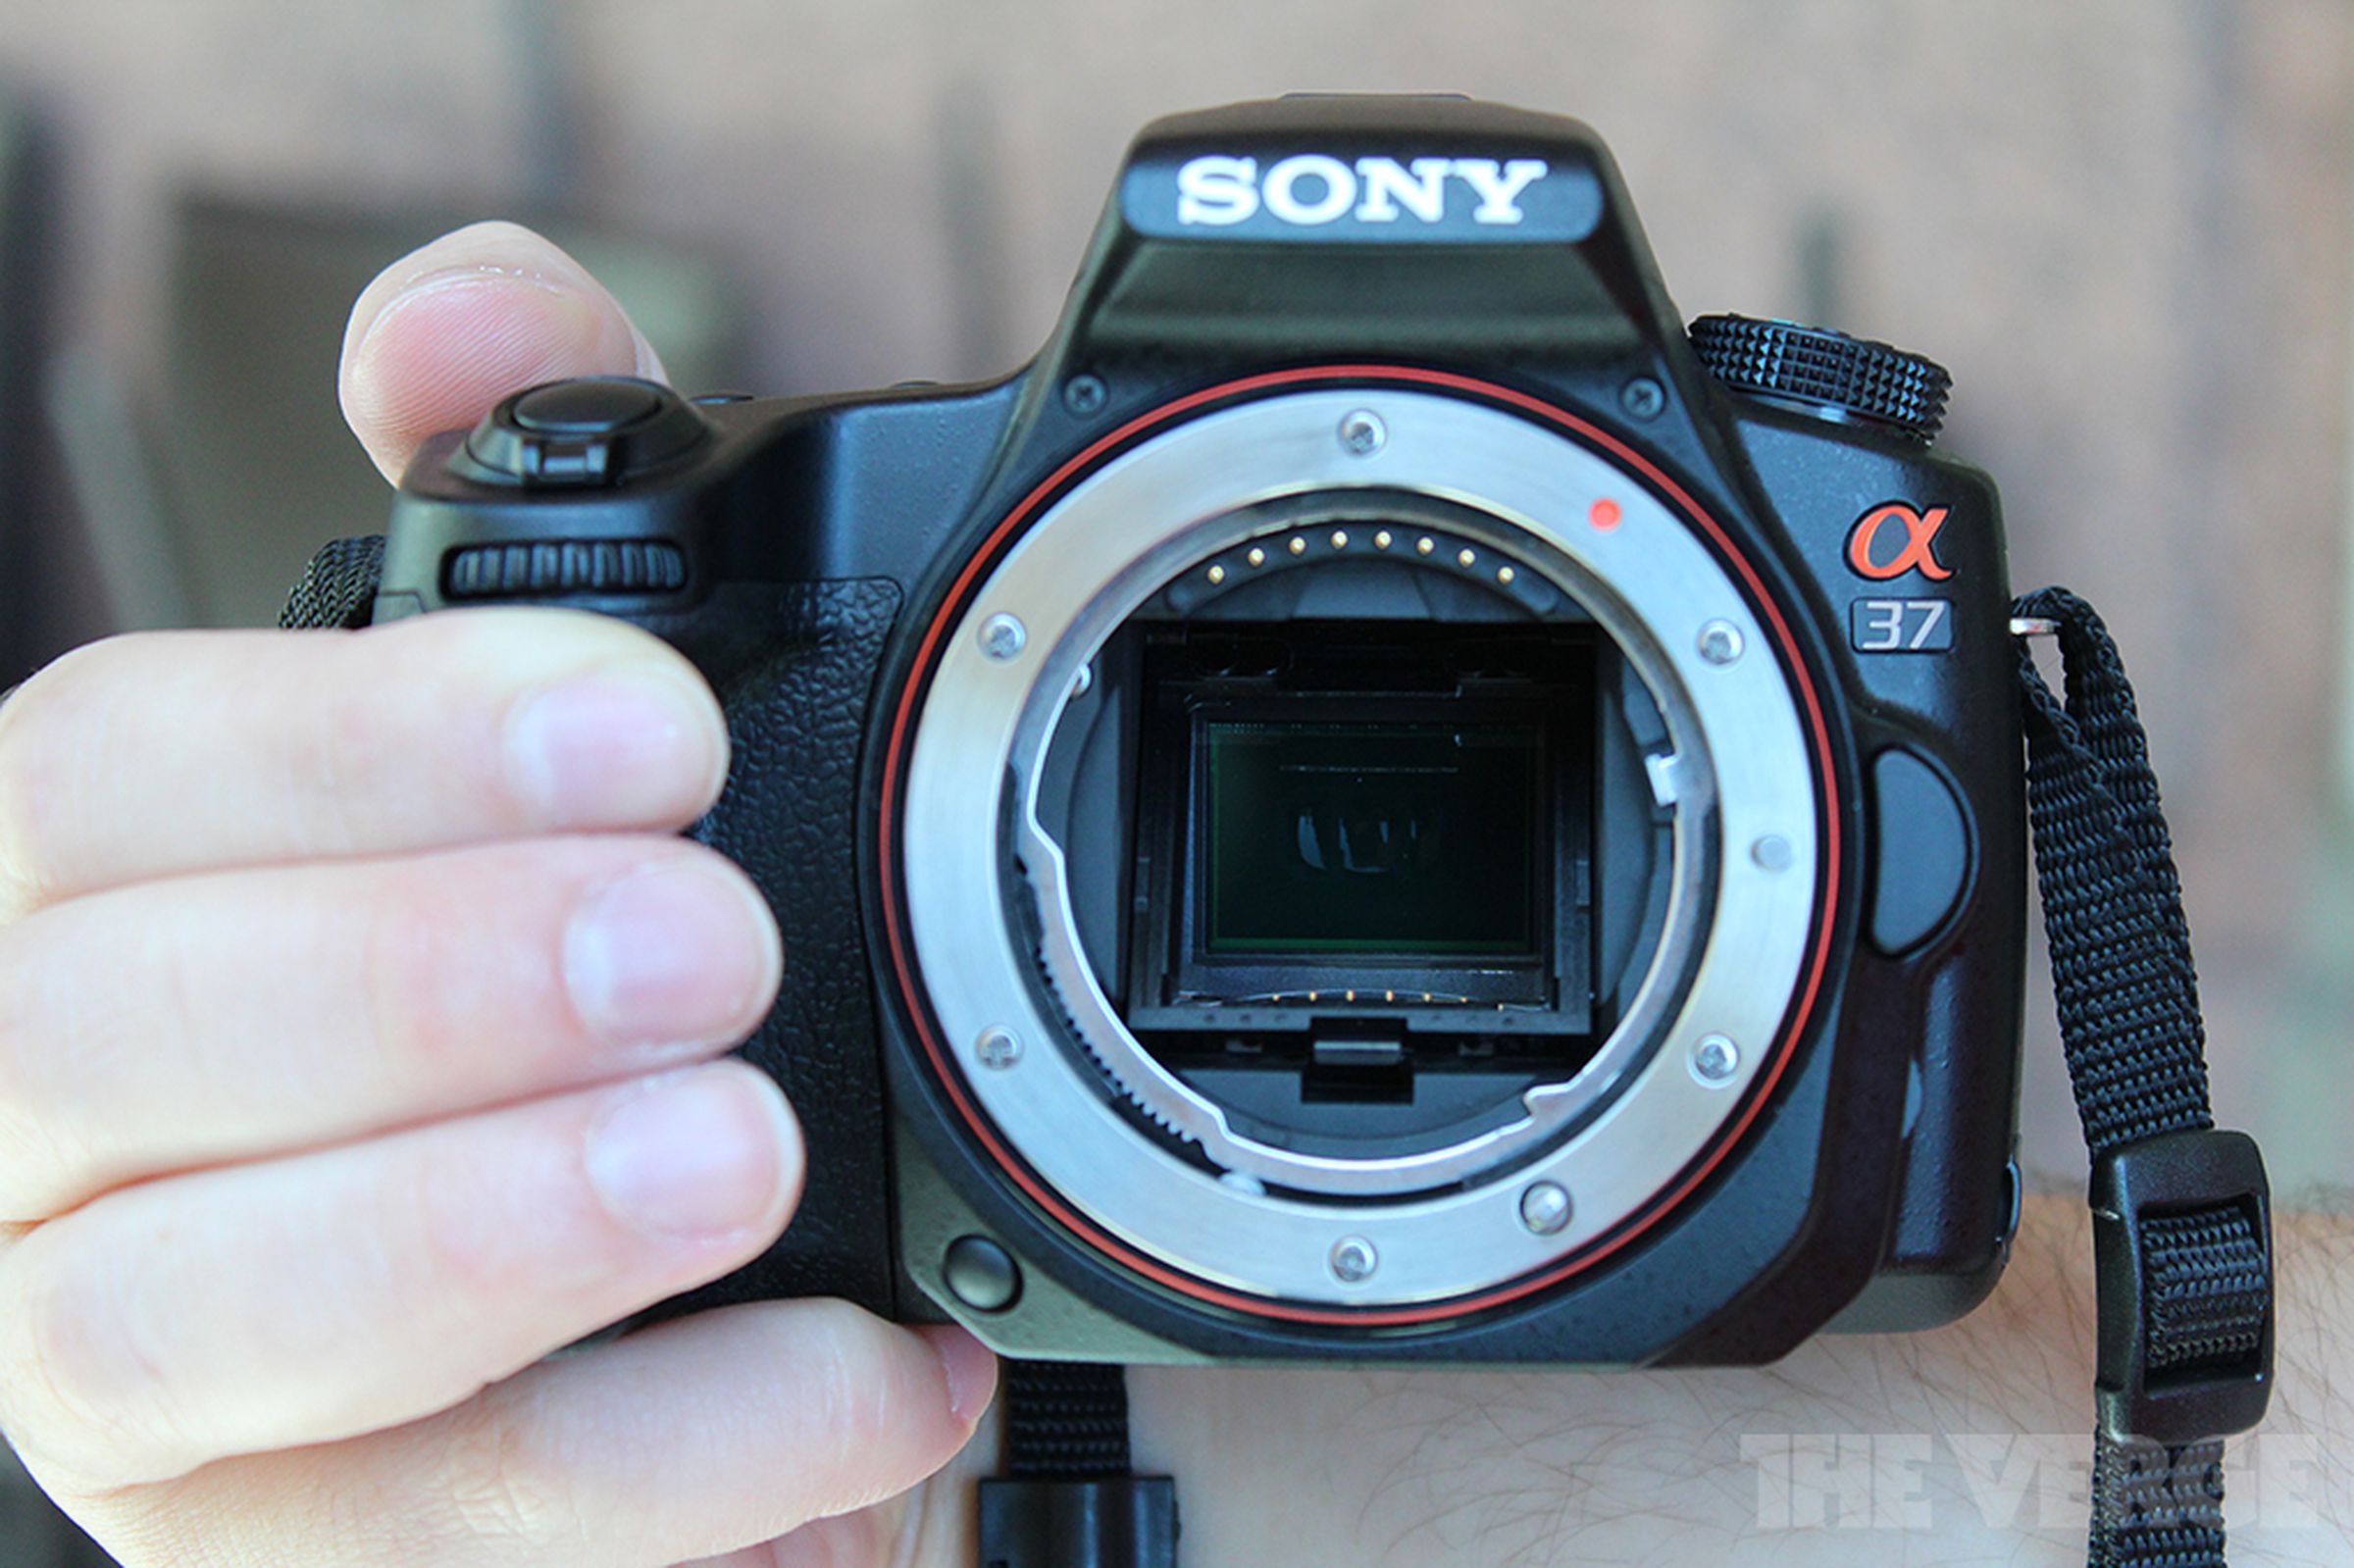 Sony Alpha SLT-A37 hands-on pictures